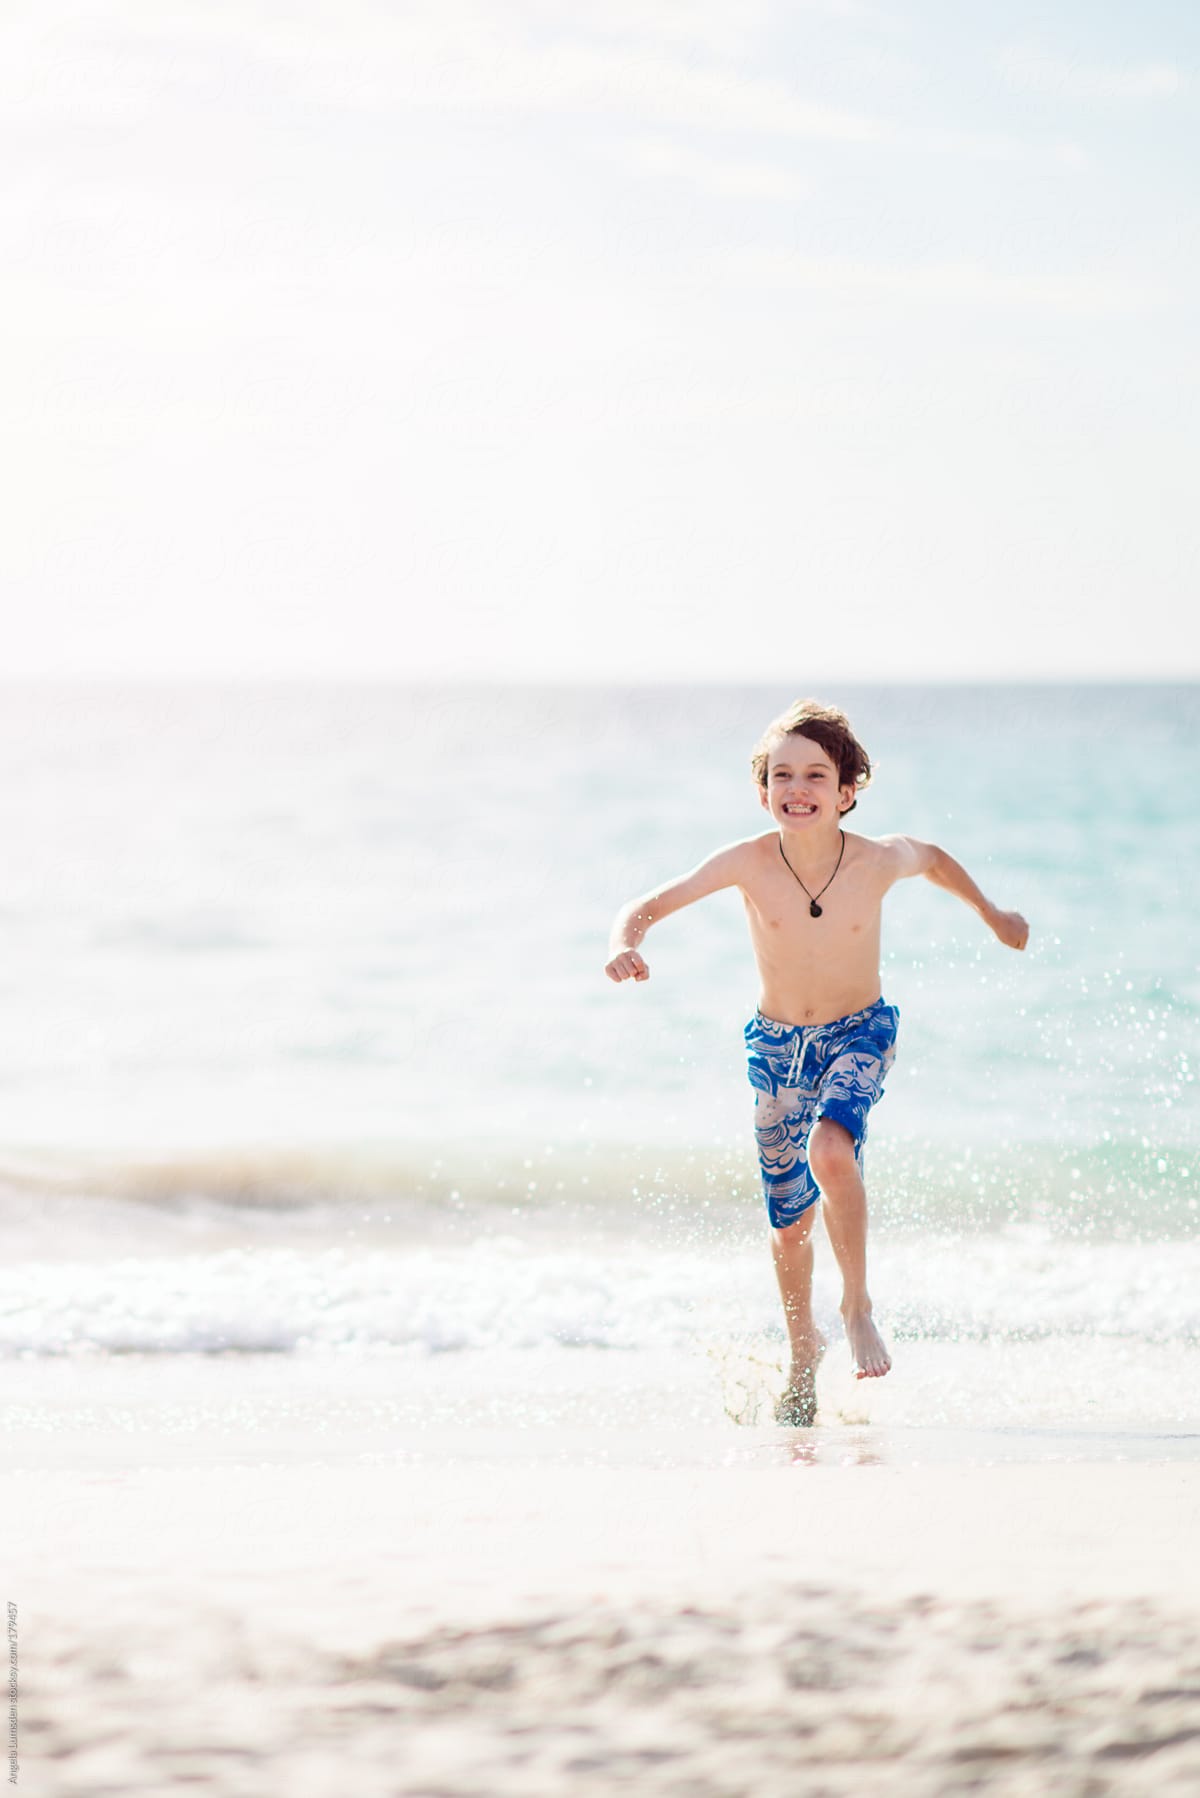 Boy in bathing suit running away from a small wave